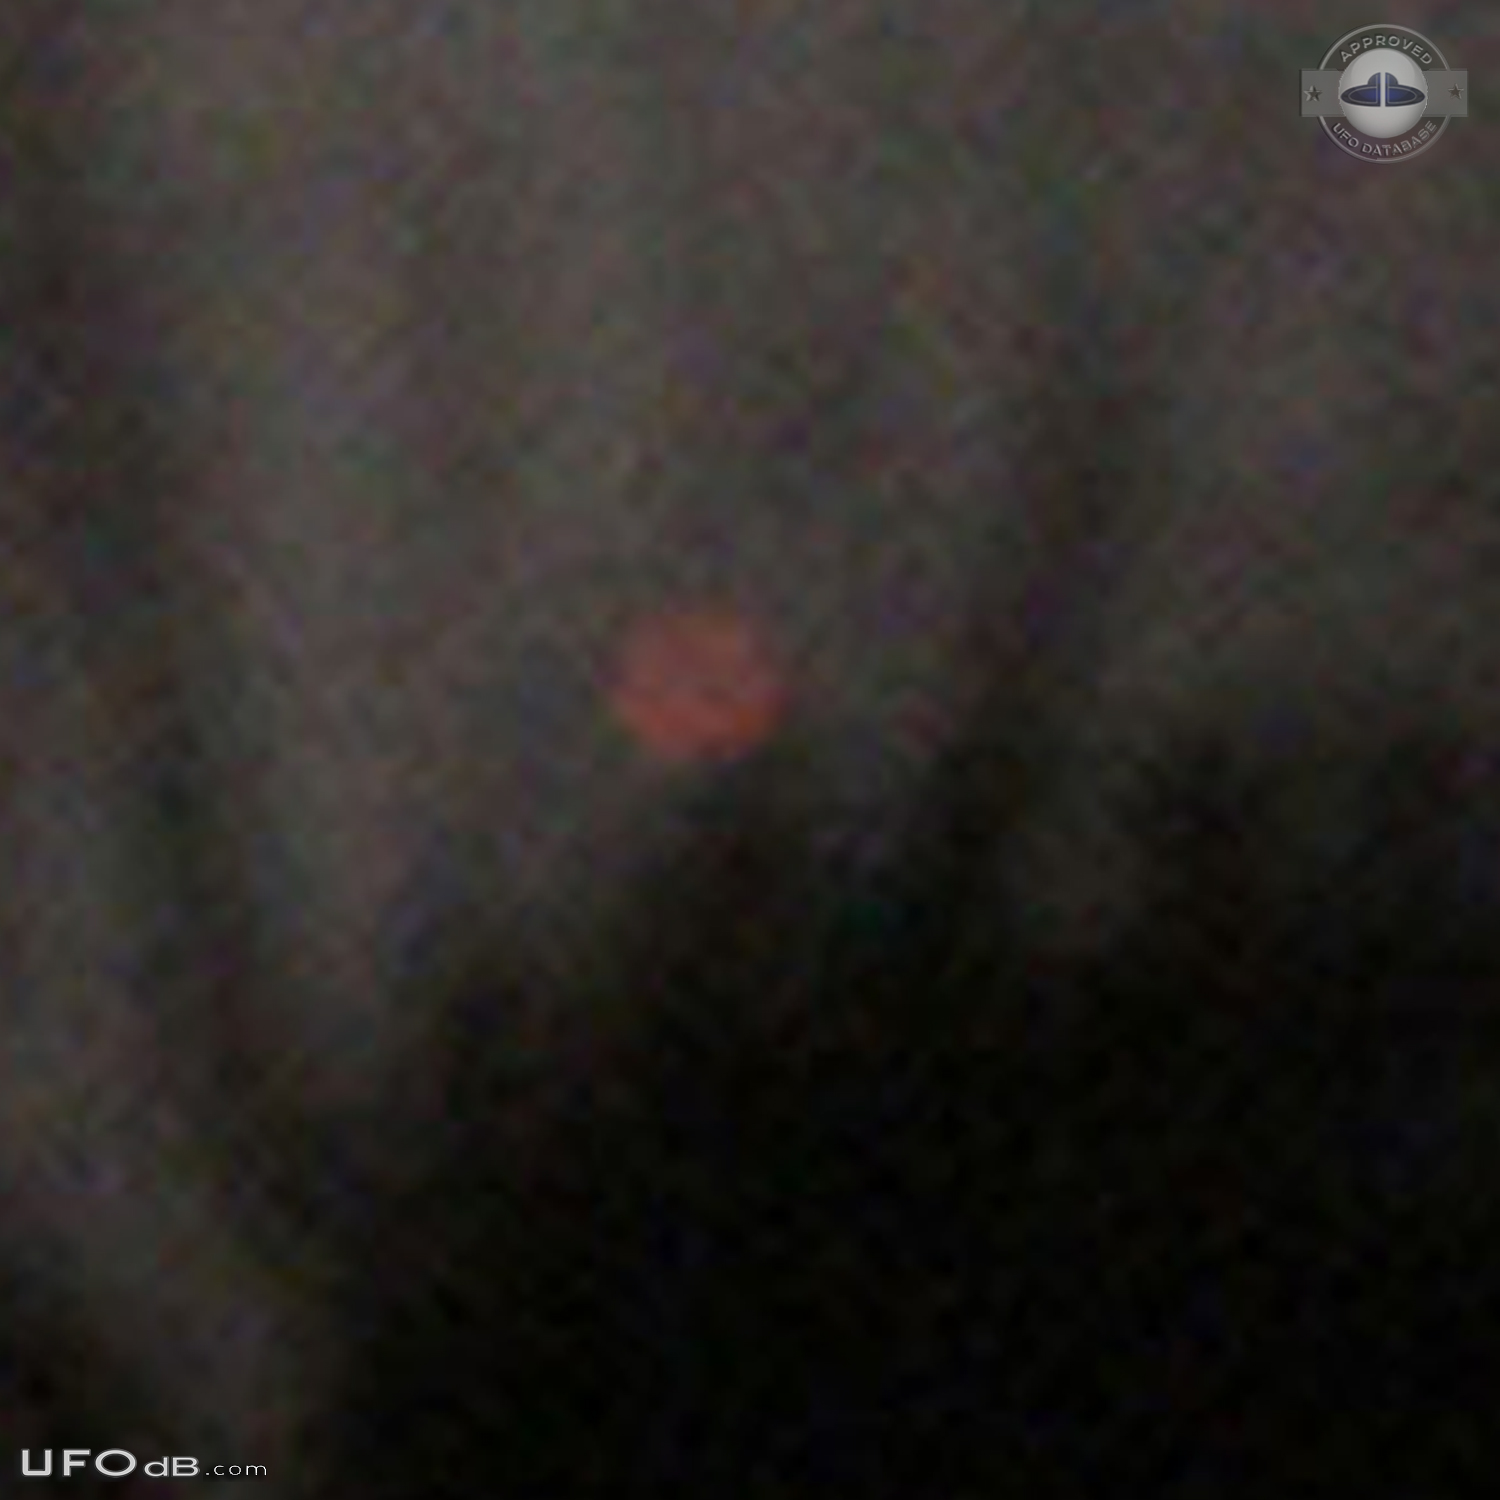 red-orange UFO pulsing, moving straight slowly Surrey BC Canada 2015 UFO Picture #664-5